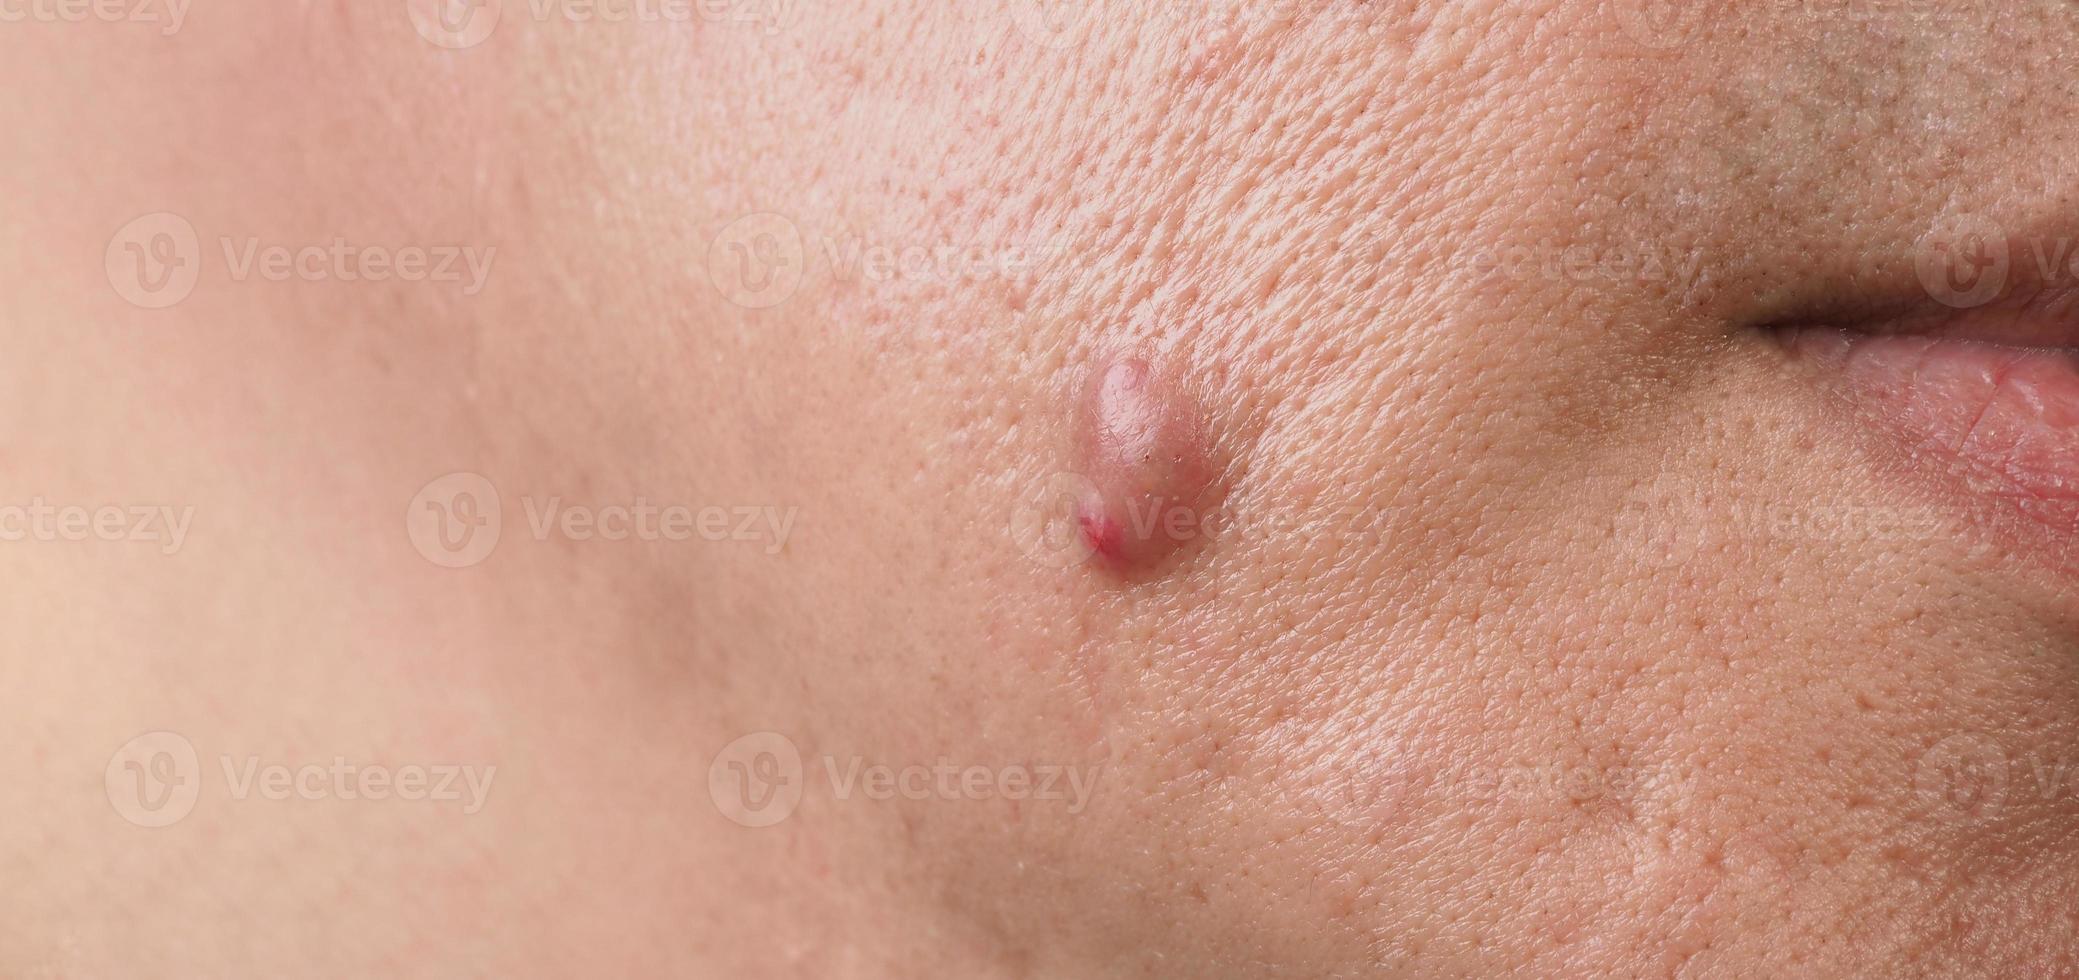 Big Acne Cyst Abscess or Ulcer Swollen area within face skin tissue. photo